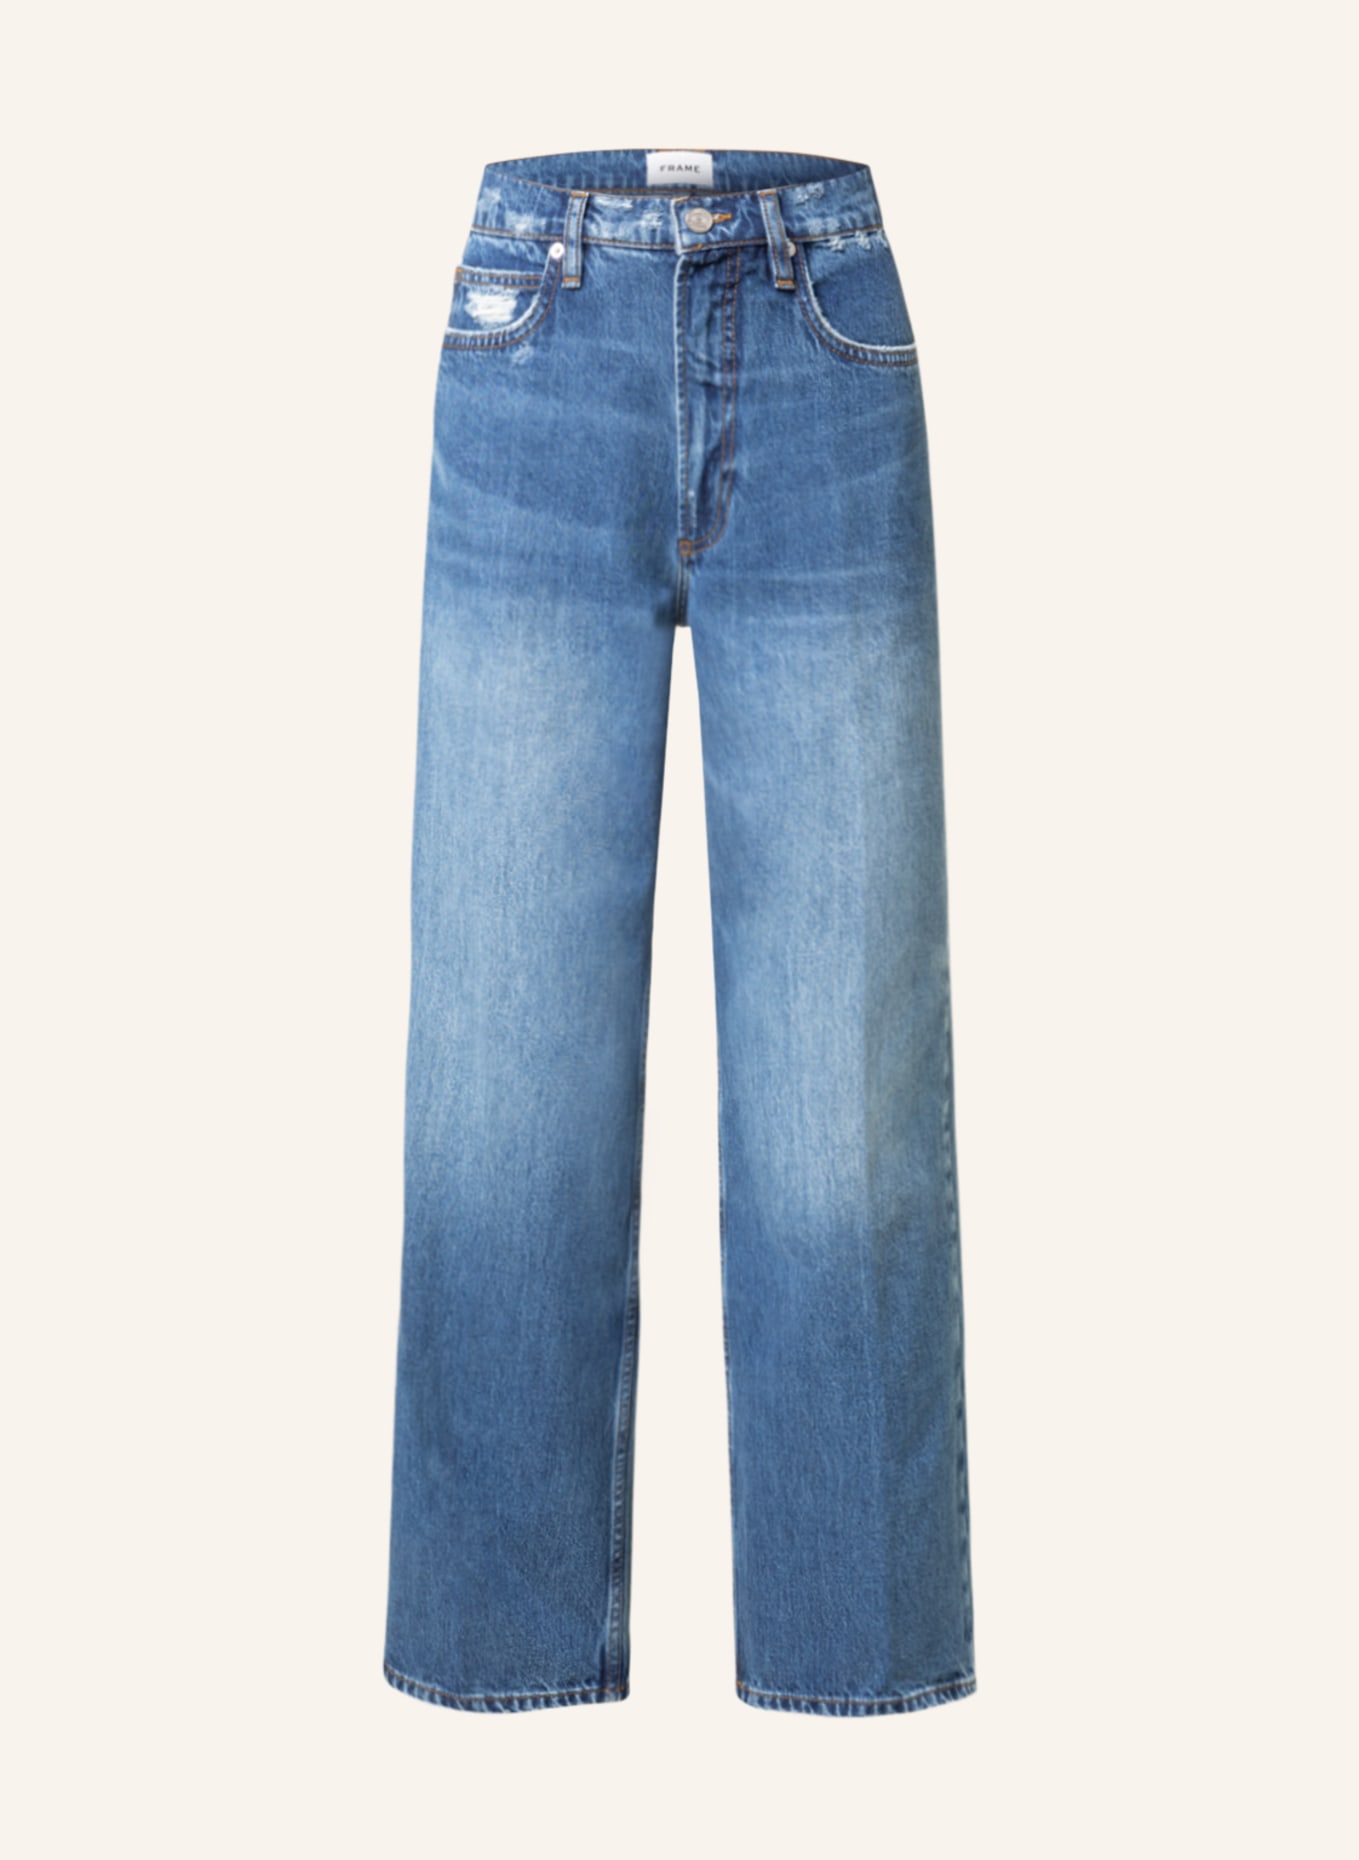 FRAME Jeans-Culotte LE PIXIE HIGH 'N' TIGHT, Farbe: STNL STEARNLEE (Bild 1)